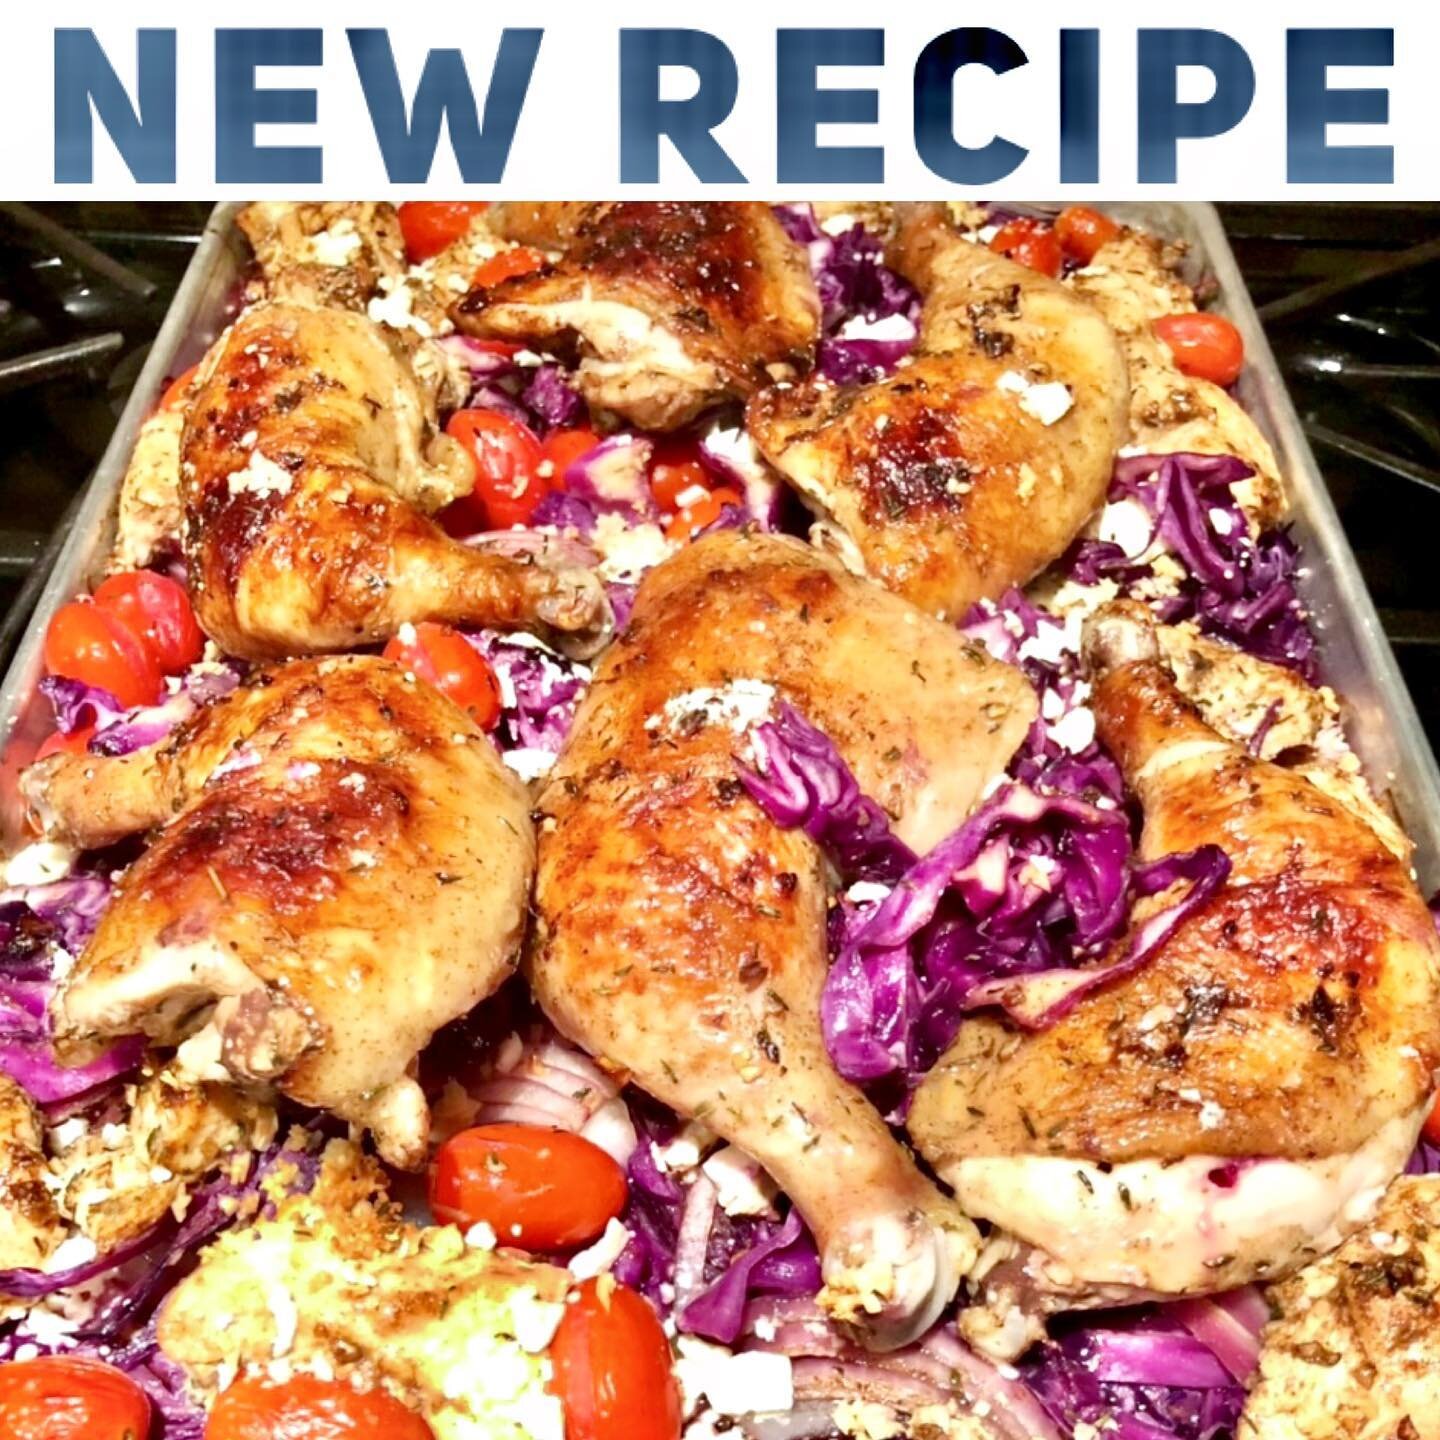 SHE PAN MEDITERRANEAN CHICKEN BAKE🍗
I love making sheet pan meals. They&rsquo;re quick, easy, &amp; can be as limitlessly inspiring as your imagination permits. Plus 1 pan means that your oven does all the work &amp; clean up is a breeze!
.
So let&r